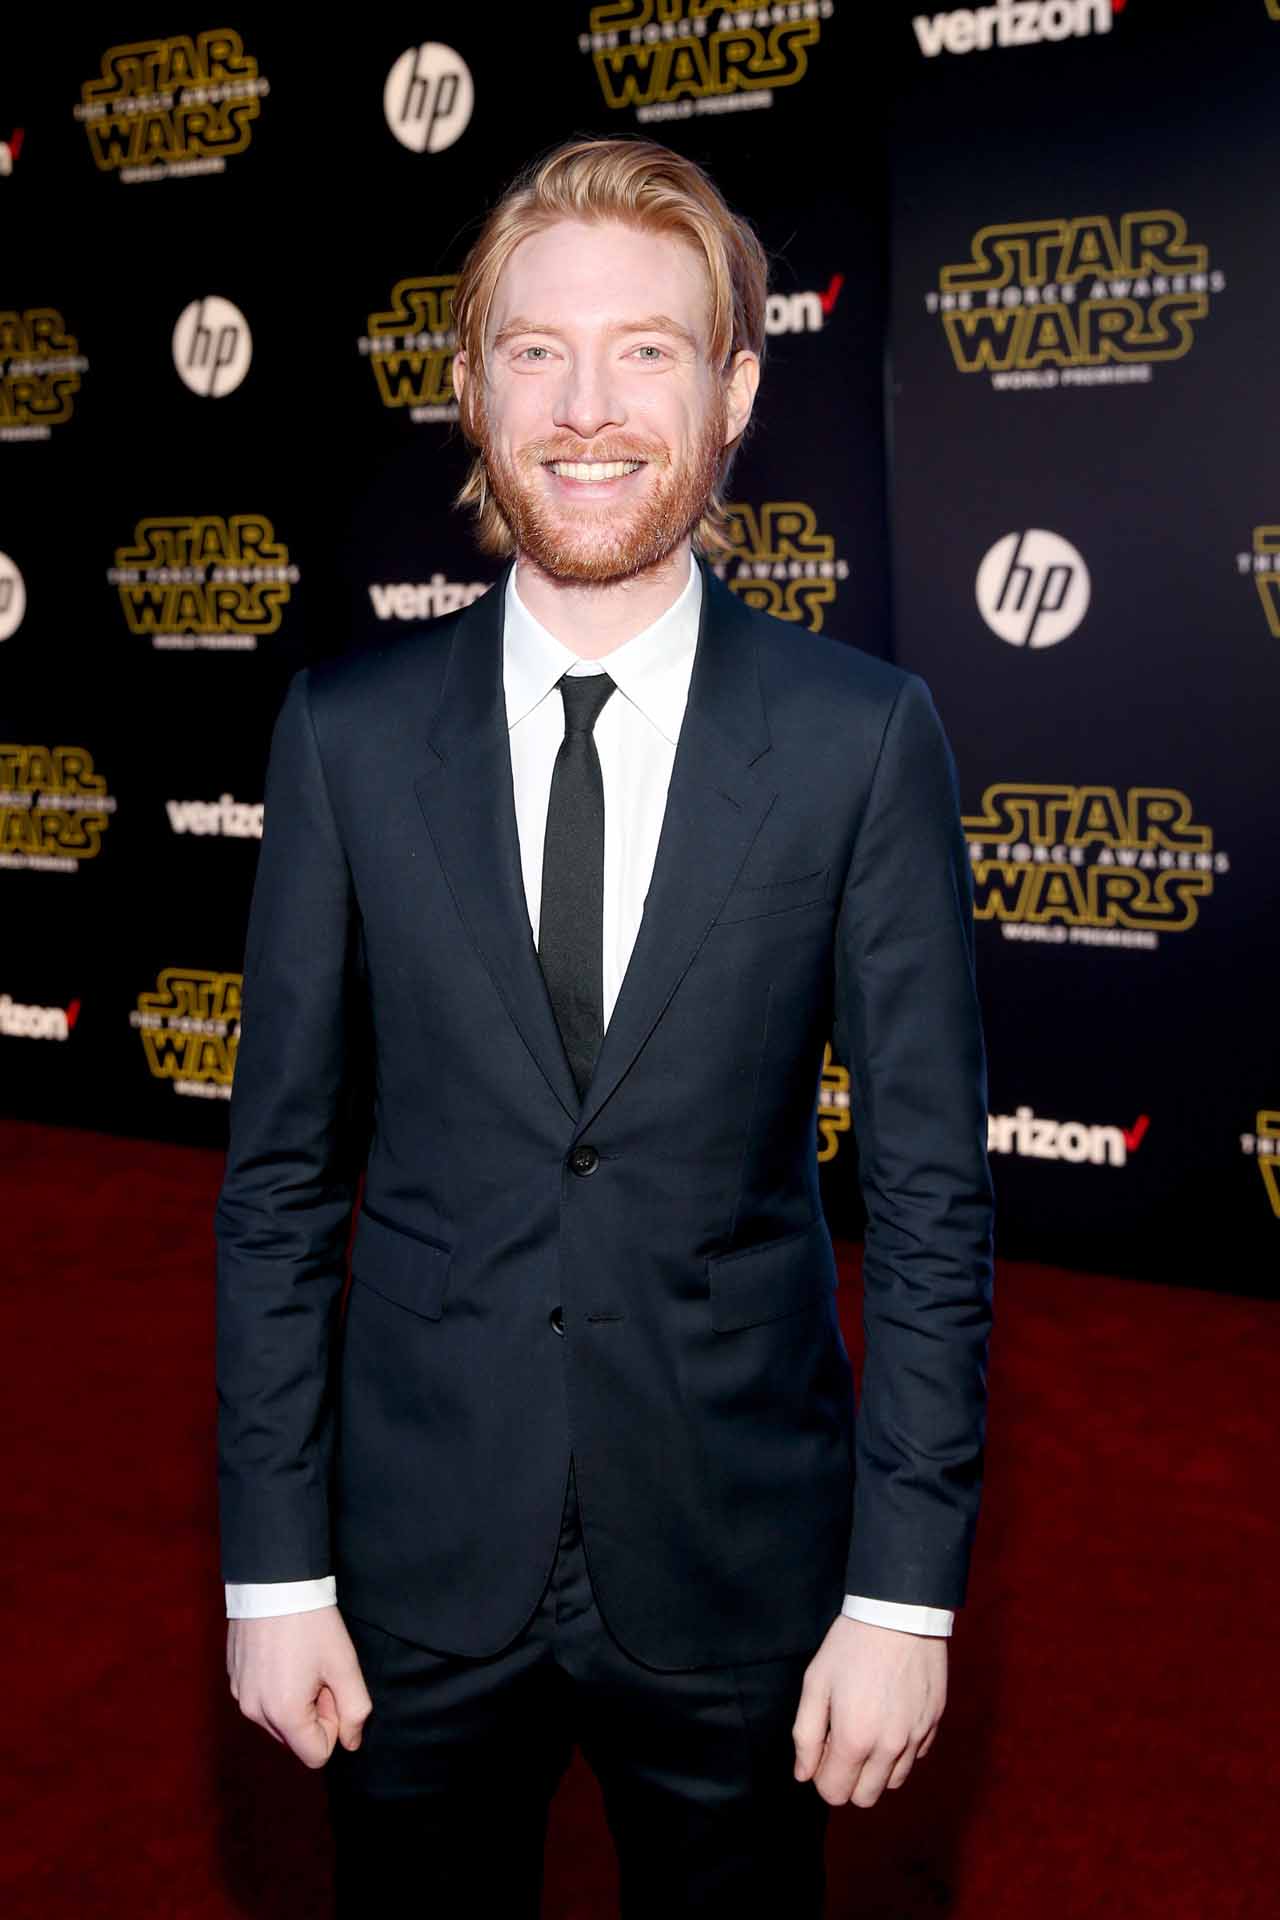 HOLLYWOOD, CA - DECEMBER 14:  Actor Domhnall Gleeson attends the World Premiere of ?Star Wars: The Force Awakens? at the Dolby, El Capitan, and TCL Theatres on December 14, 2015 in Hollywood, California.  (Photo by Jesse Grant/Getty Images for Disney) *** Local Caption *** Domhnall Gleeson